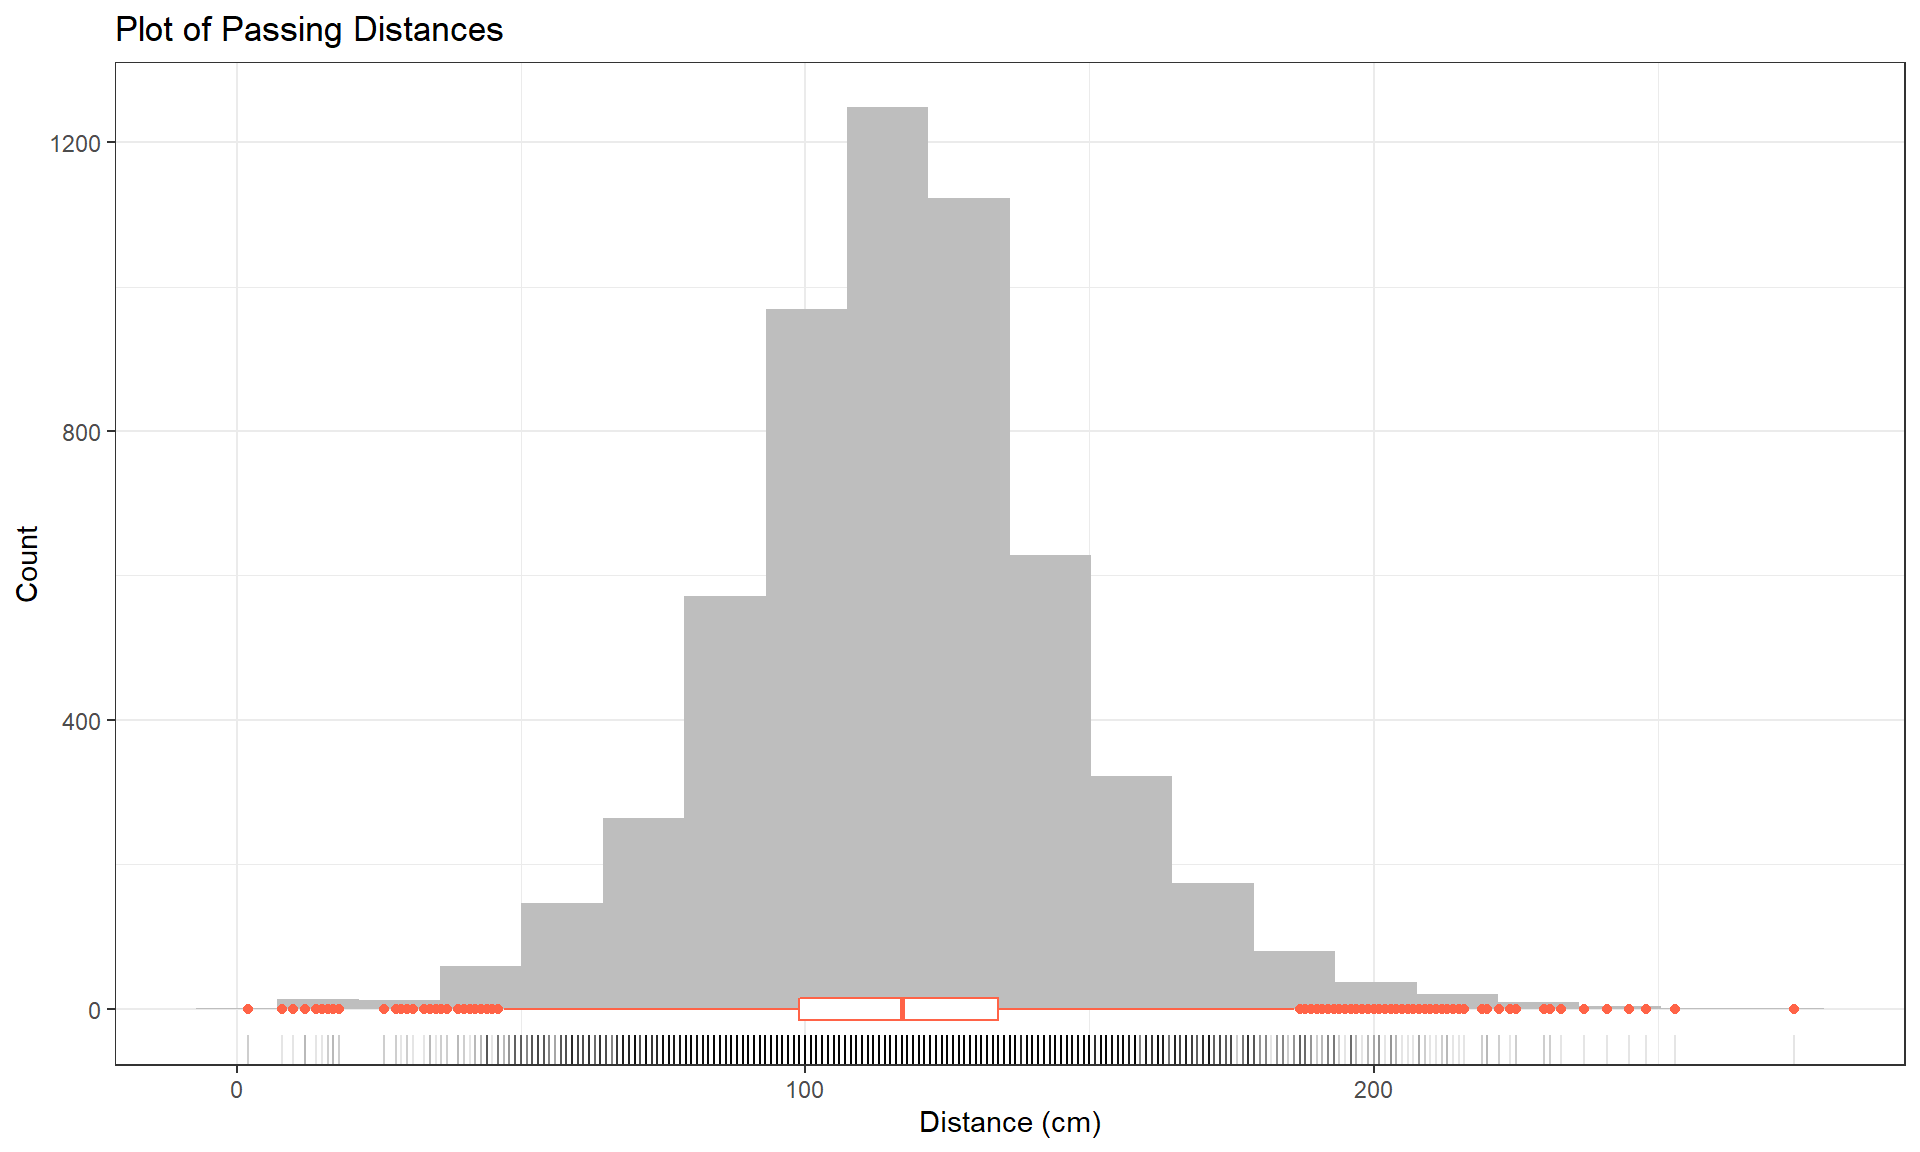 Histogram (with 20 bins), boxplot, and rug of passing distances (in cm).